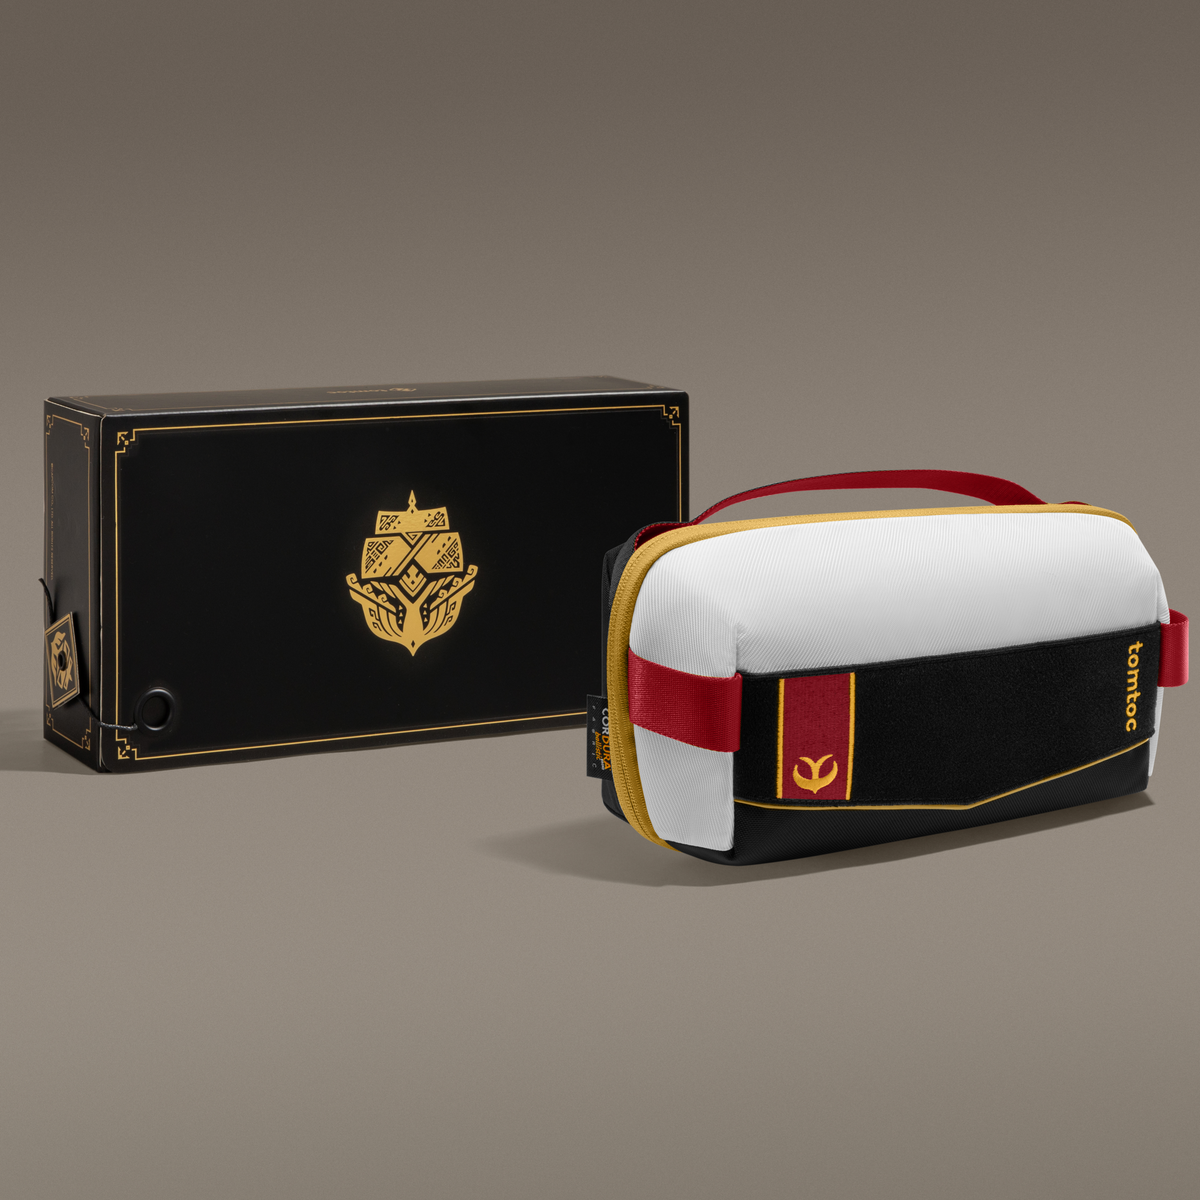 secondary_MHRS-A05 Royal Order Accessory Bag